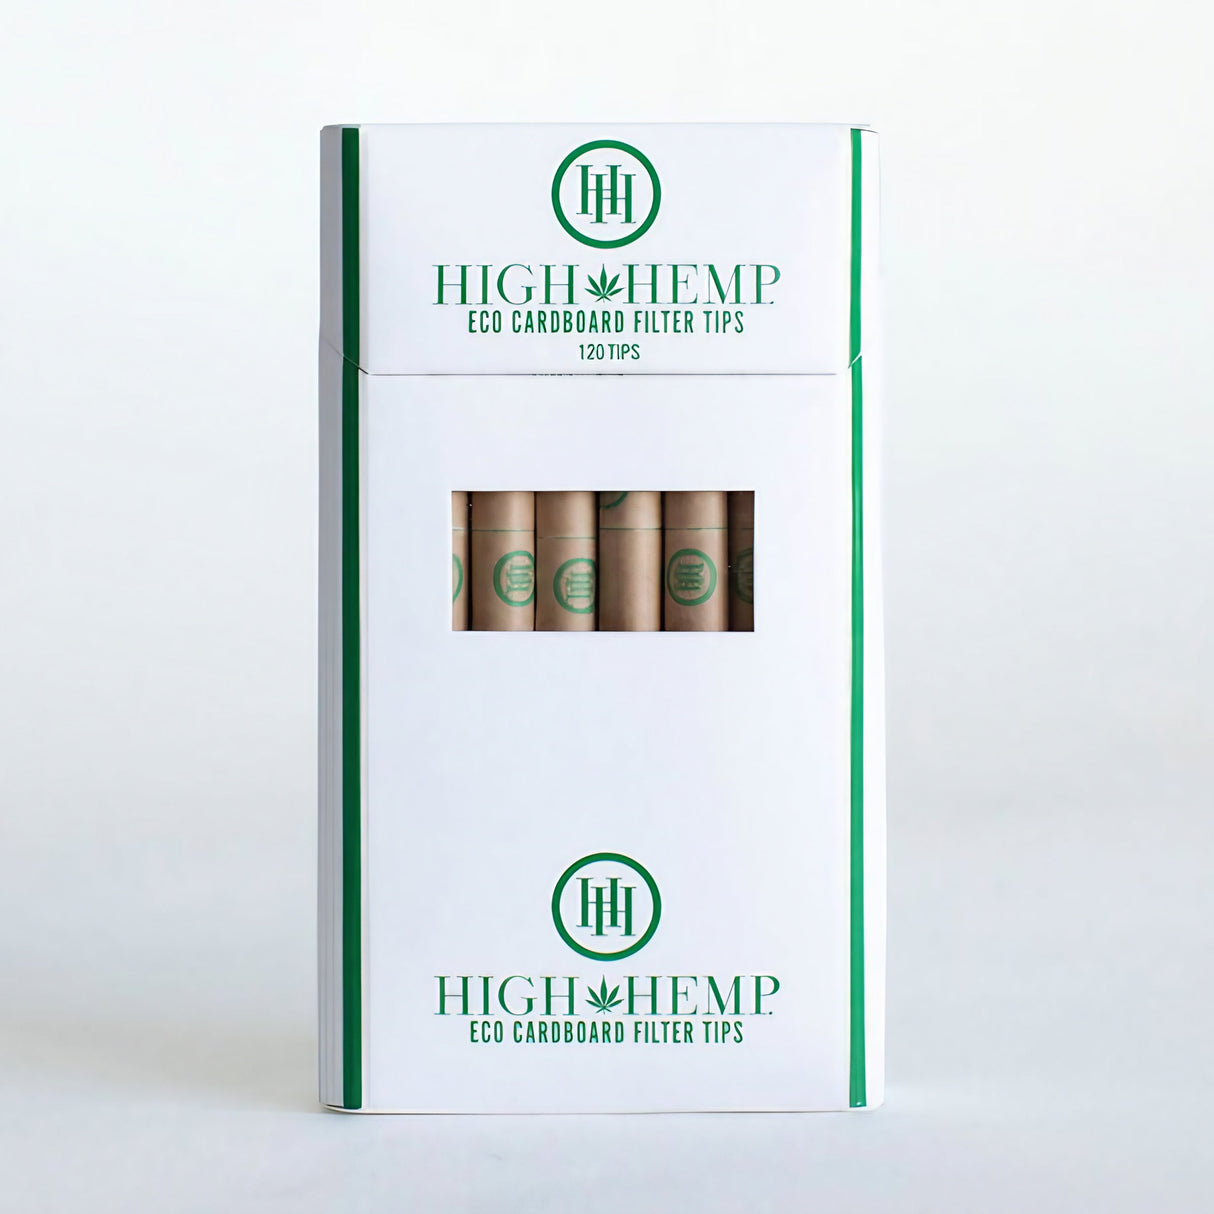 High Hemp Eco Cardboard Filter Tips 12-Pack Display Front View on White Background